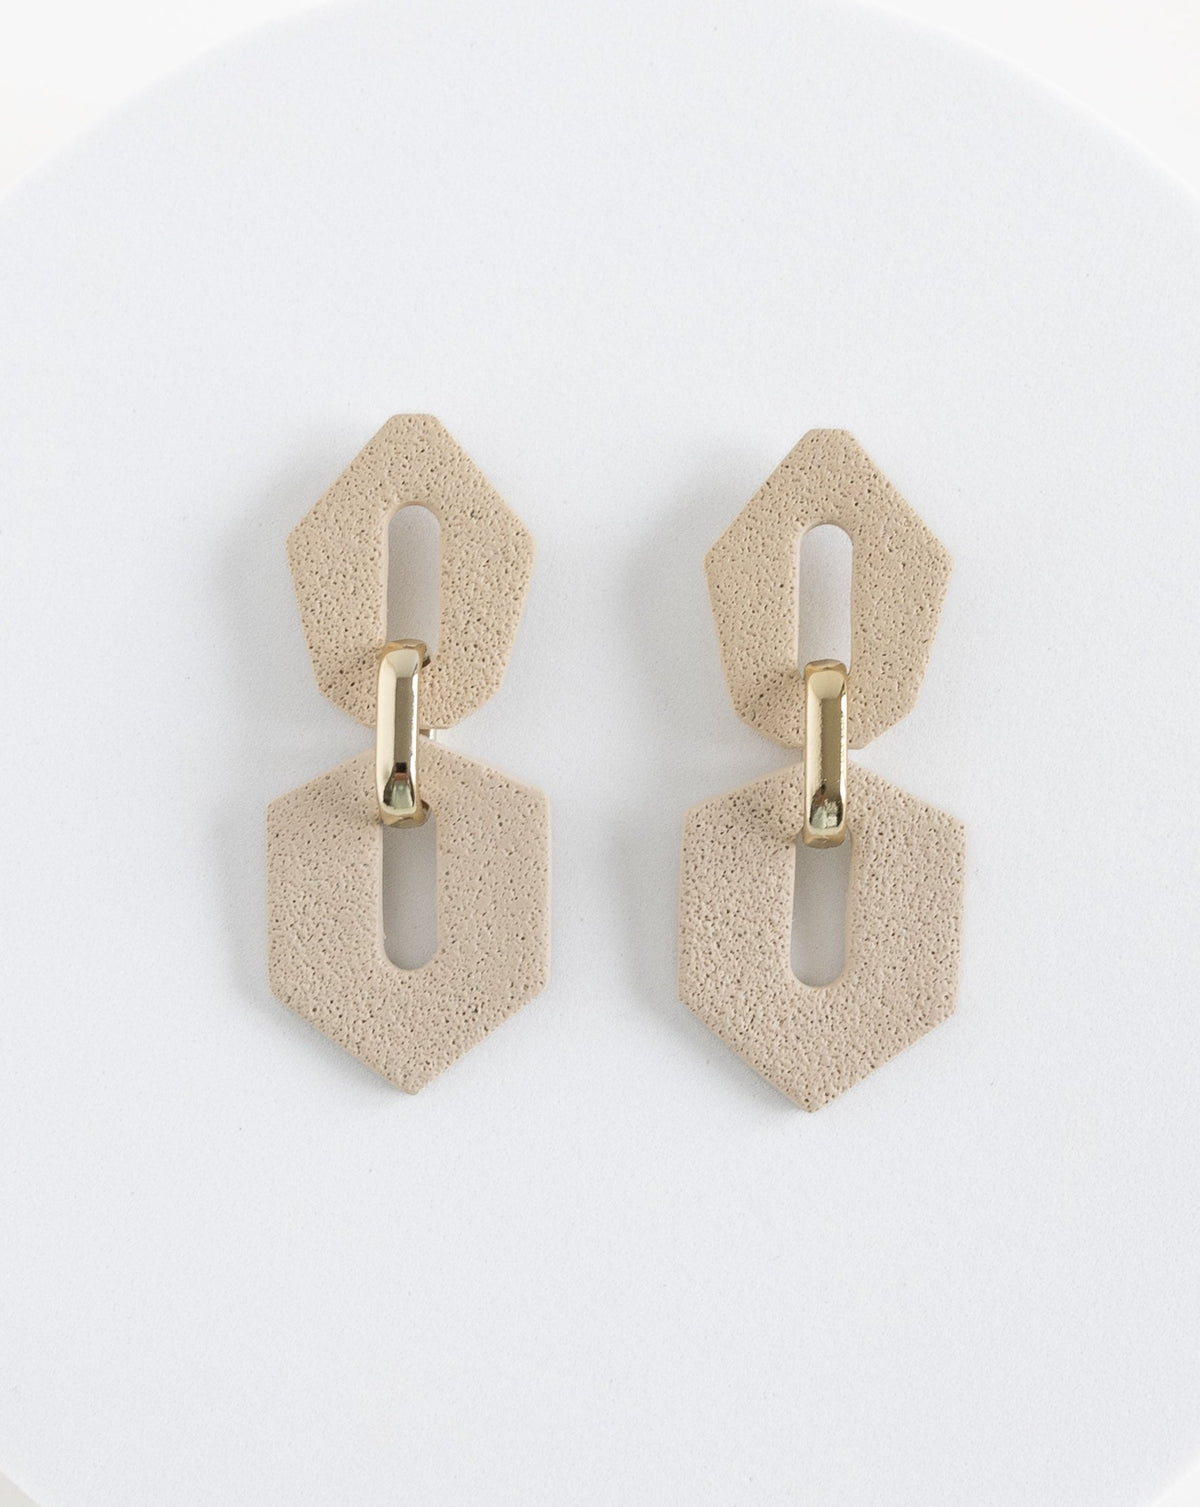 Front view of Shilla earrings in beige color.